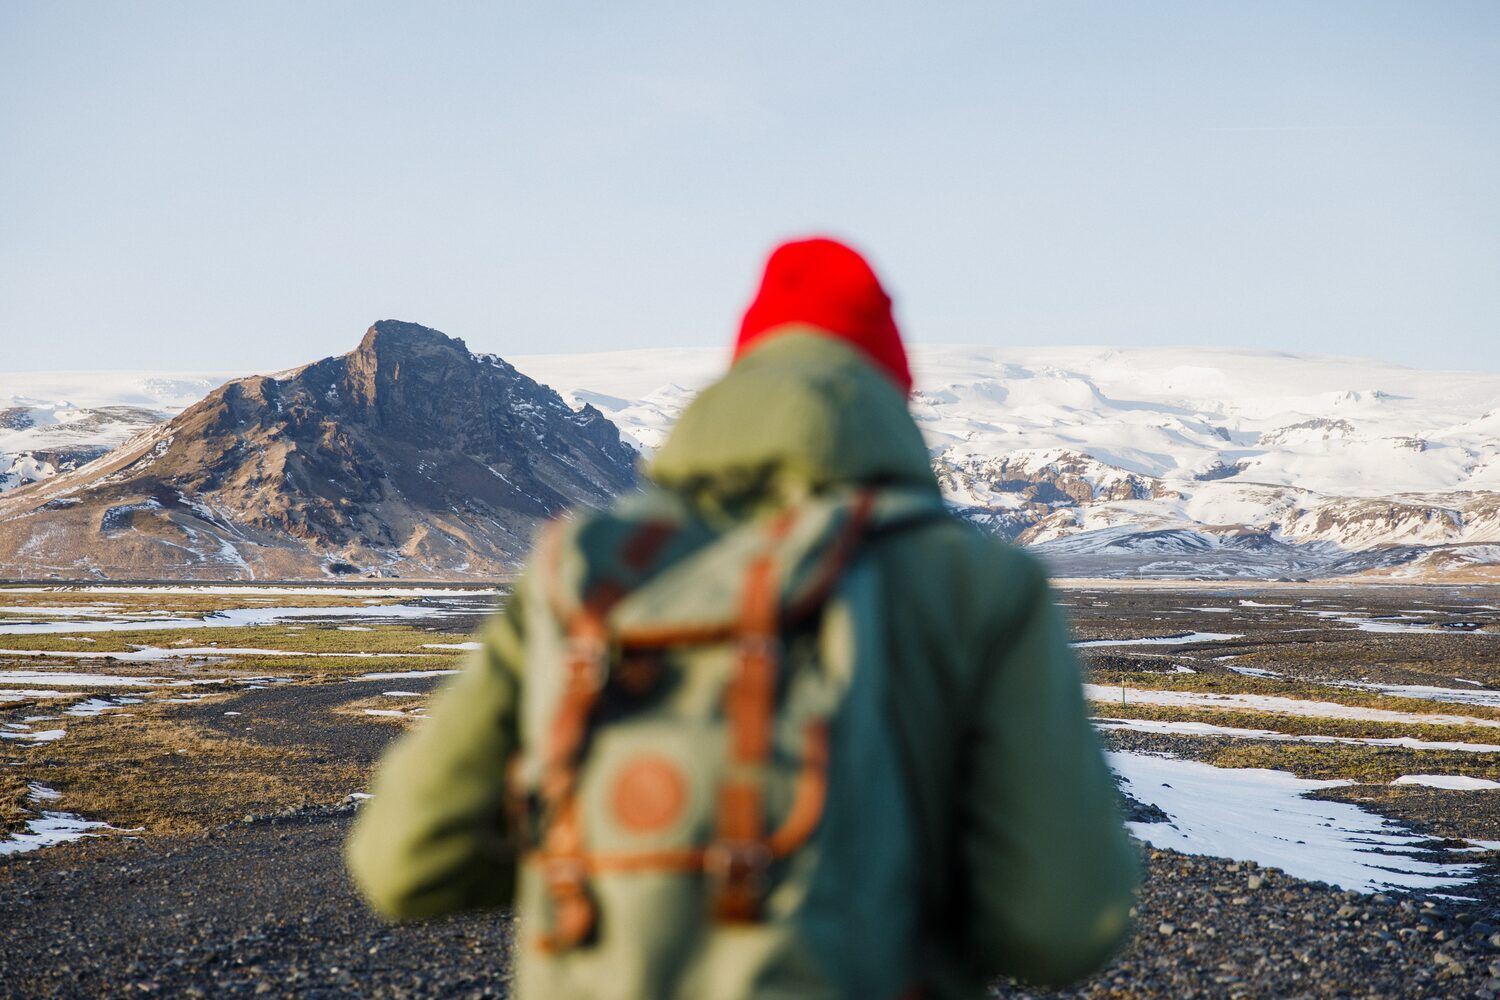 Male traveler in green coat and red beanie hat with green backpack, walking on cobbled path, with Icelandic snowy mountains in background.